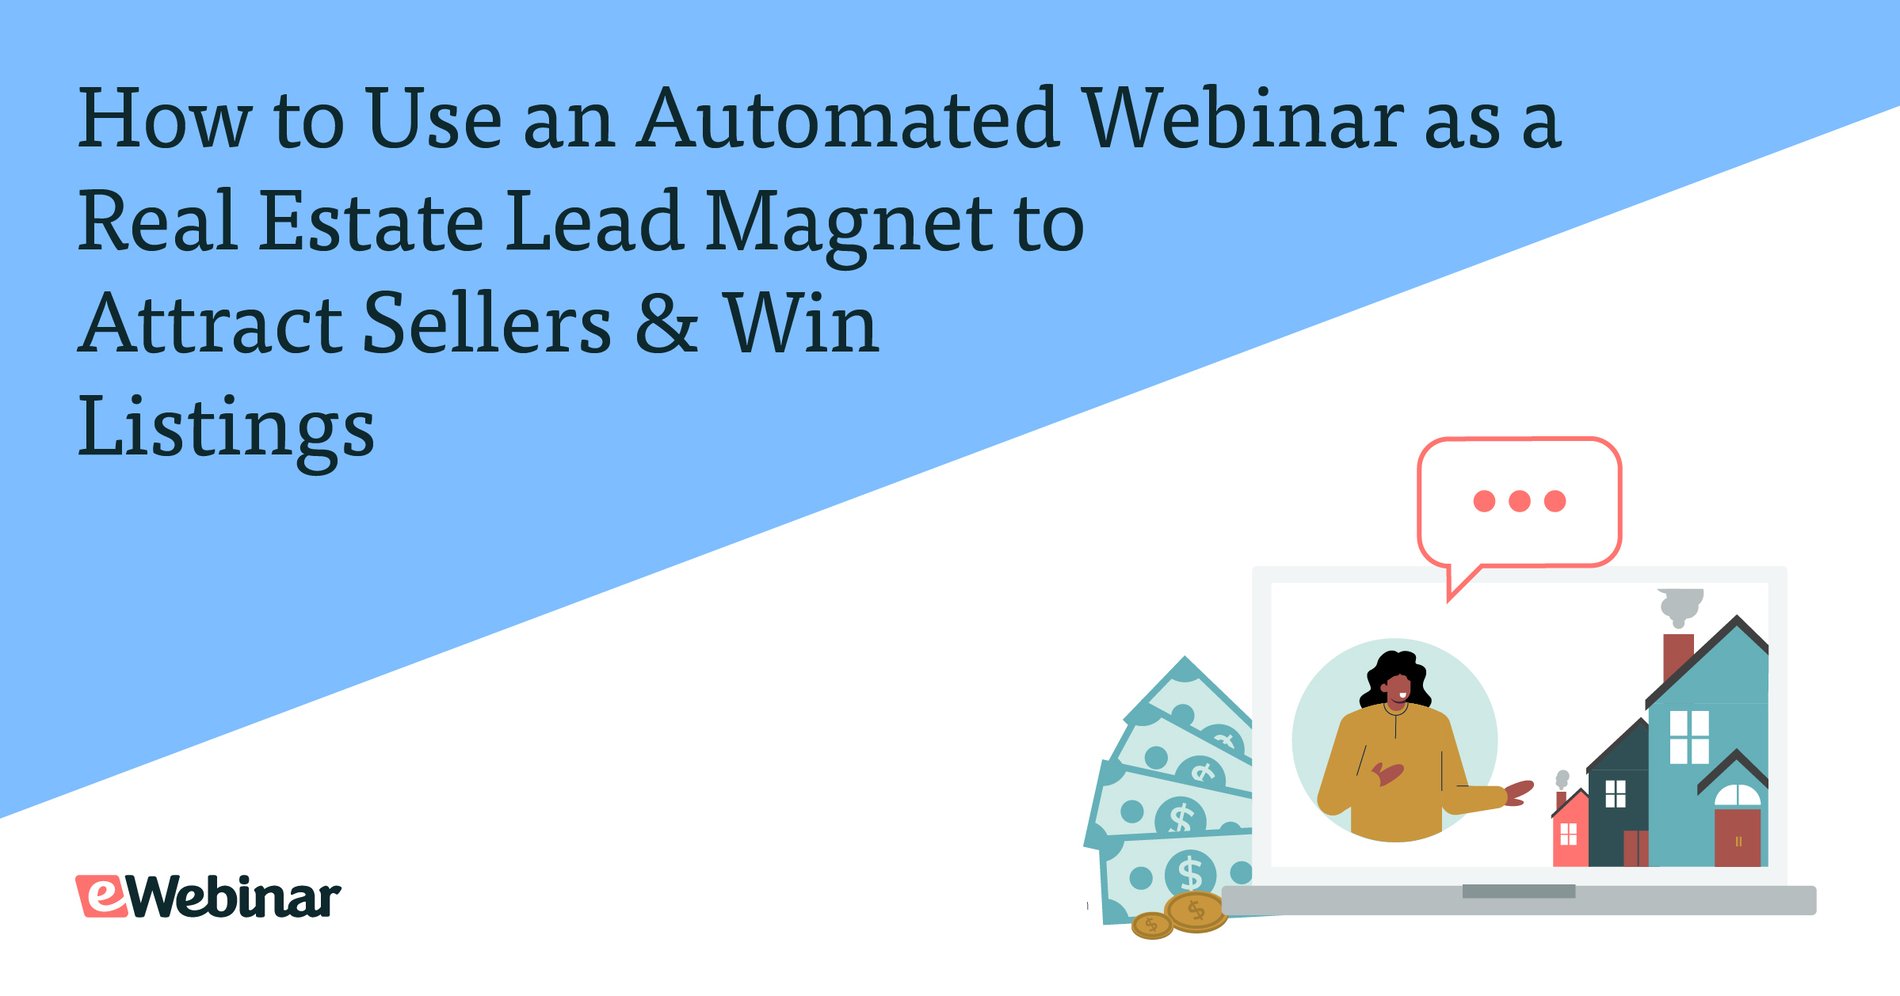 How to Use an Automated Webinar as a Real Estate Lead Magnet to Attract Sellers and Win Listings